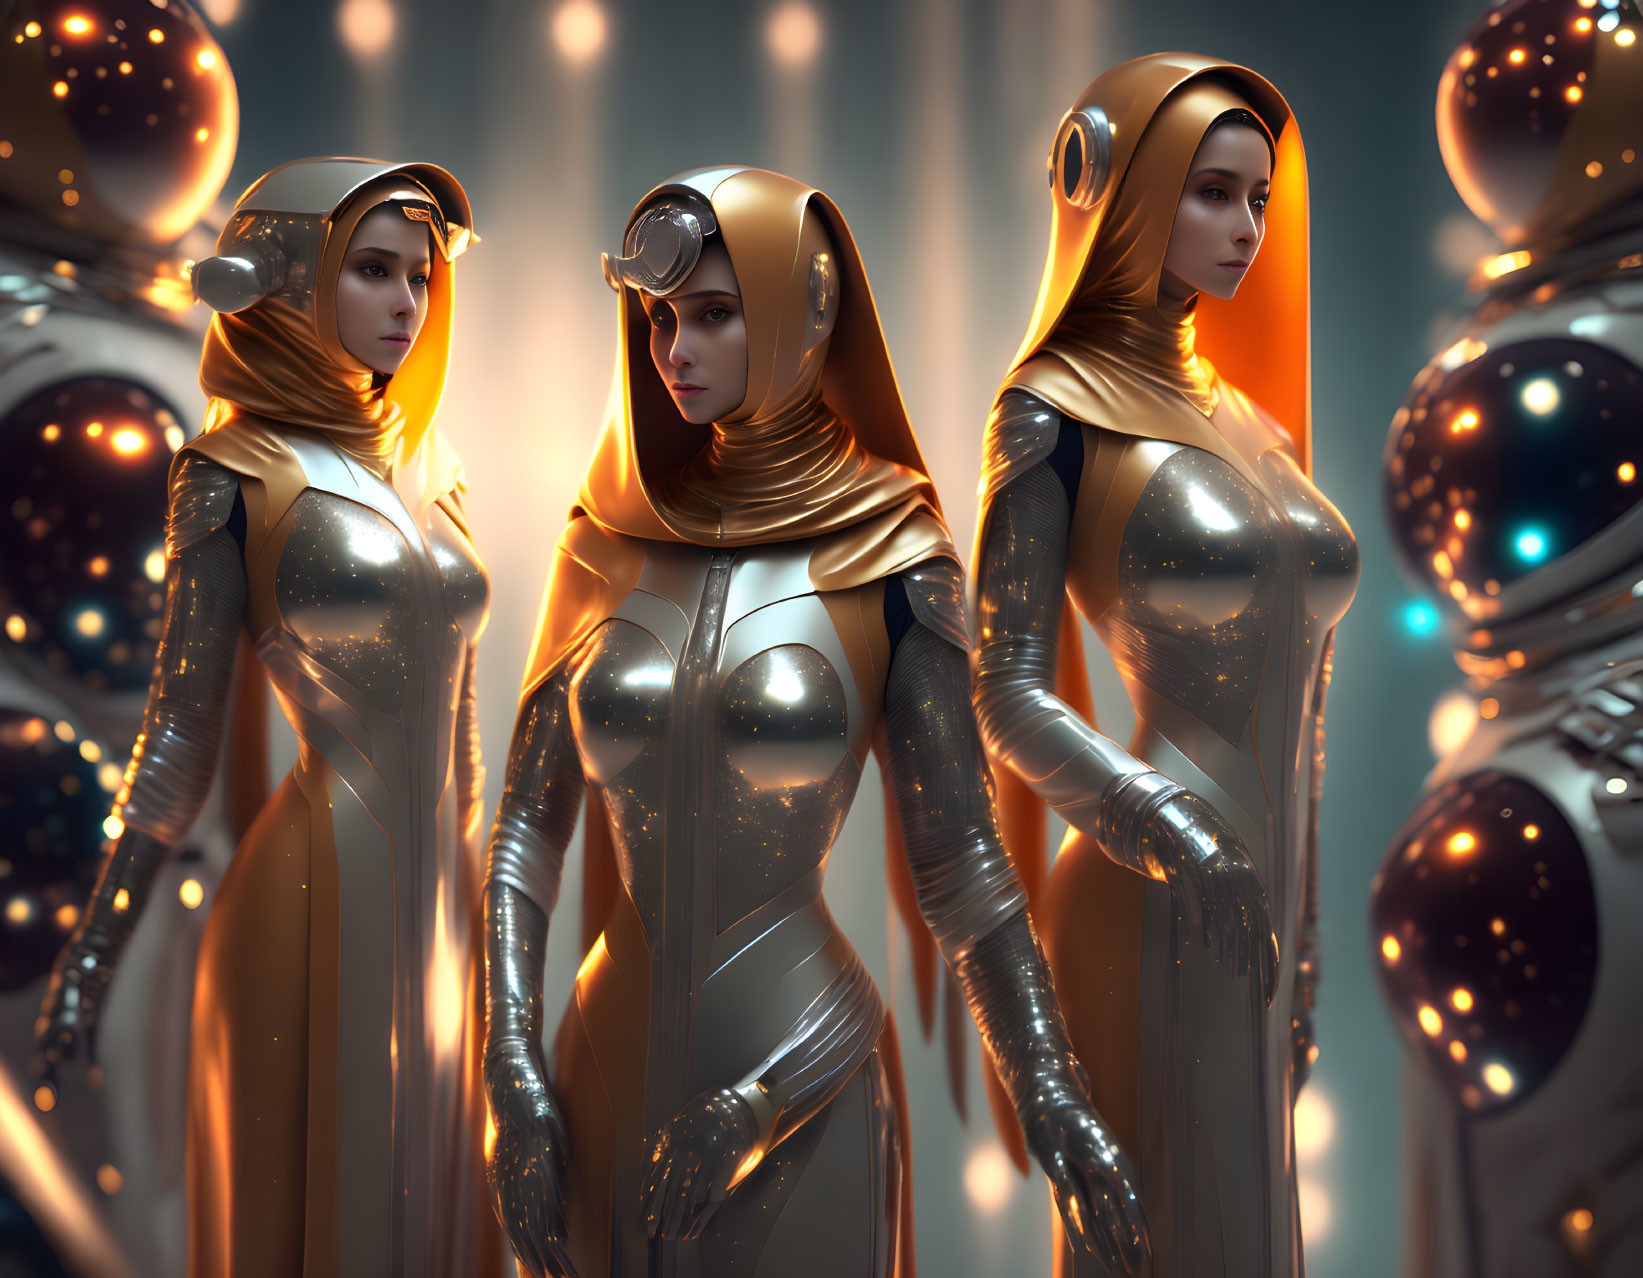 Three futuristic women in metallic suits and golden cloaks with high-tech helmets in front of glowing orbs.